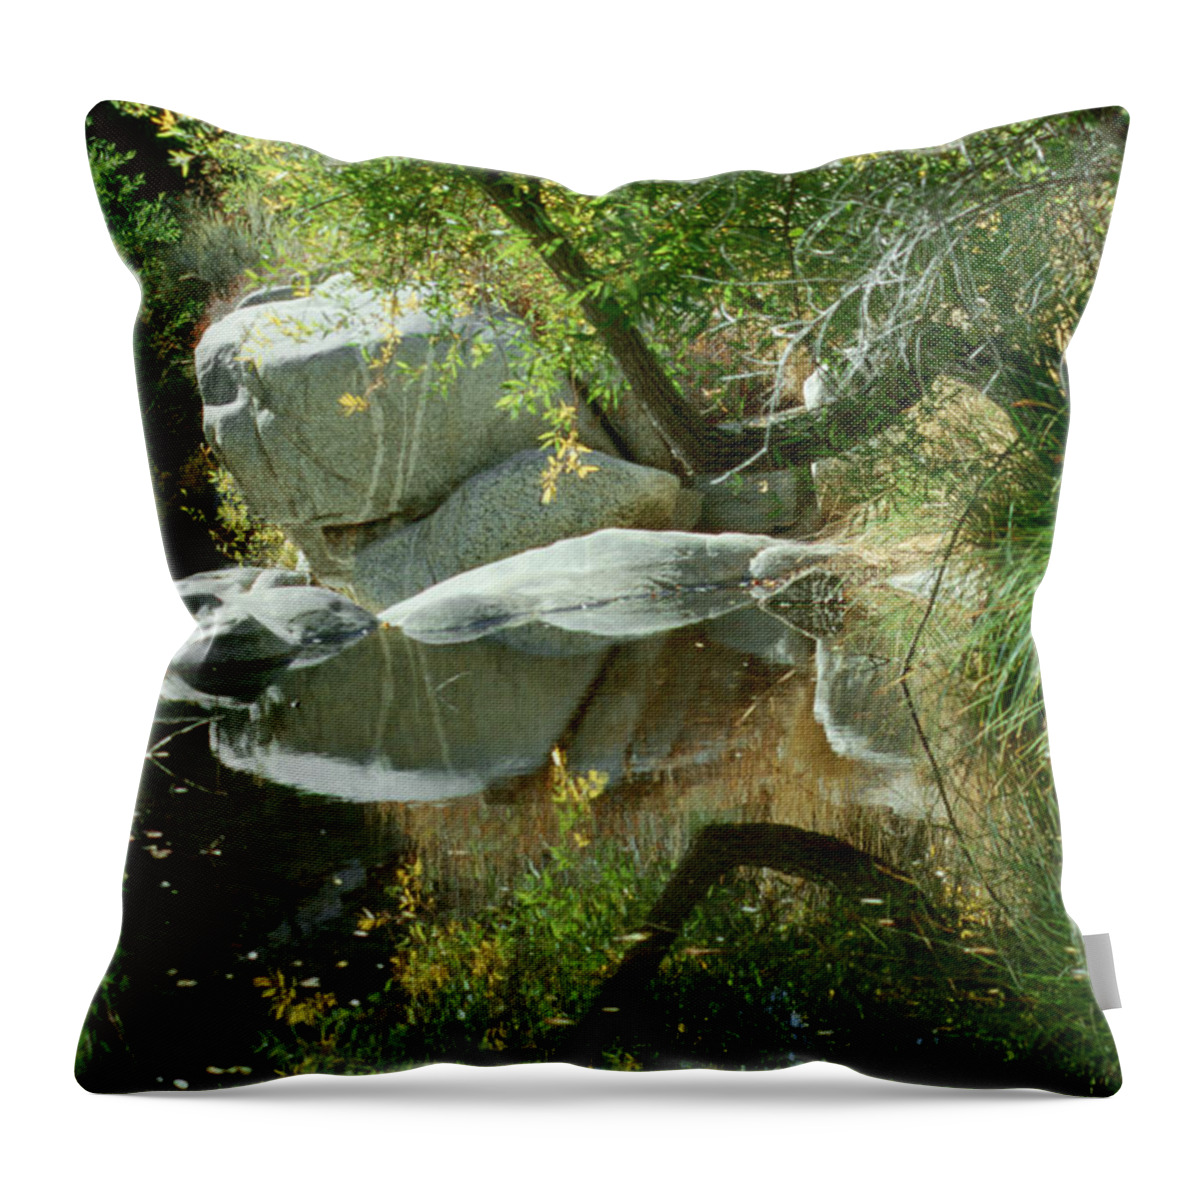 Landscape Throw Pillow featuring the photograph Landscape 1 by Andy Shomock